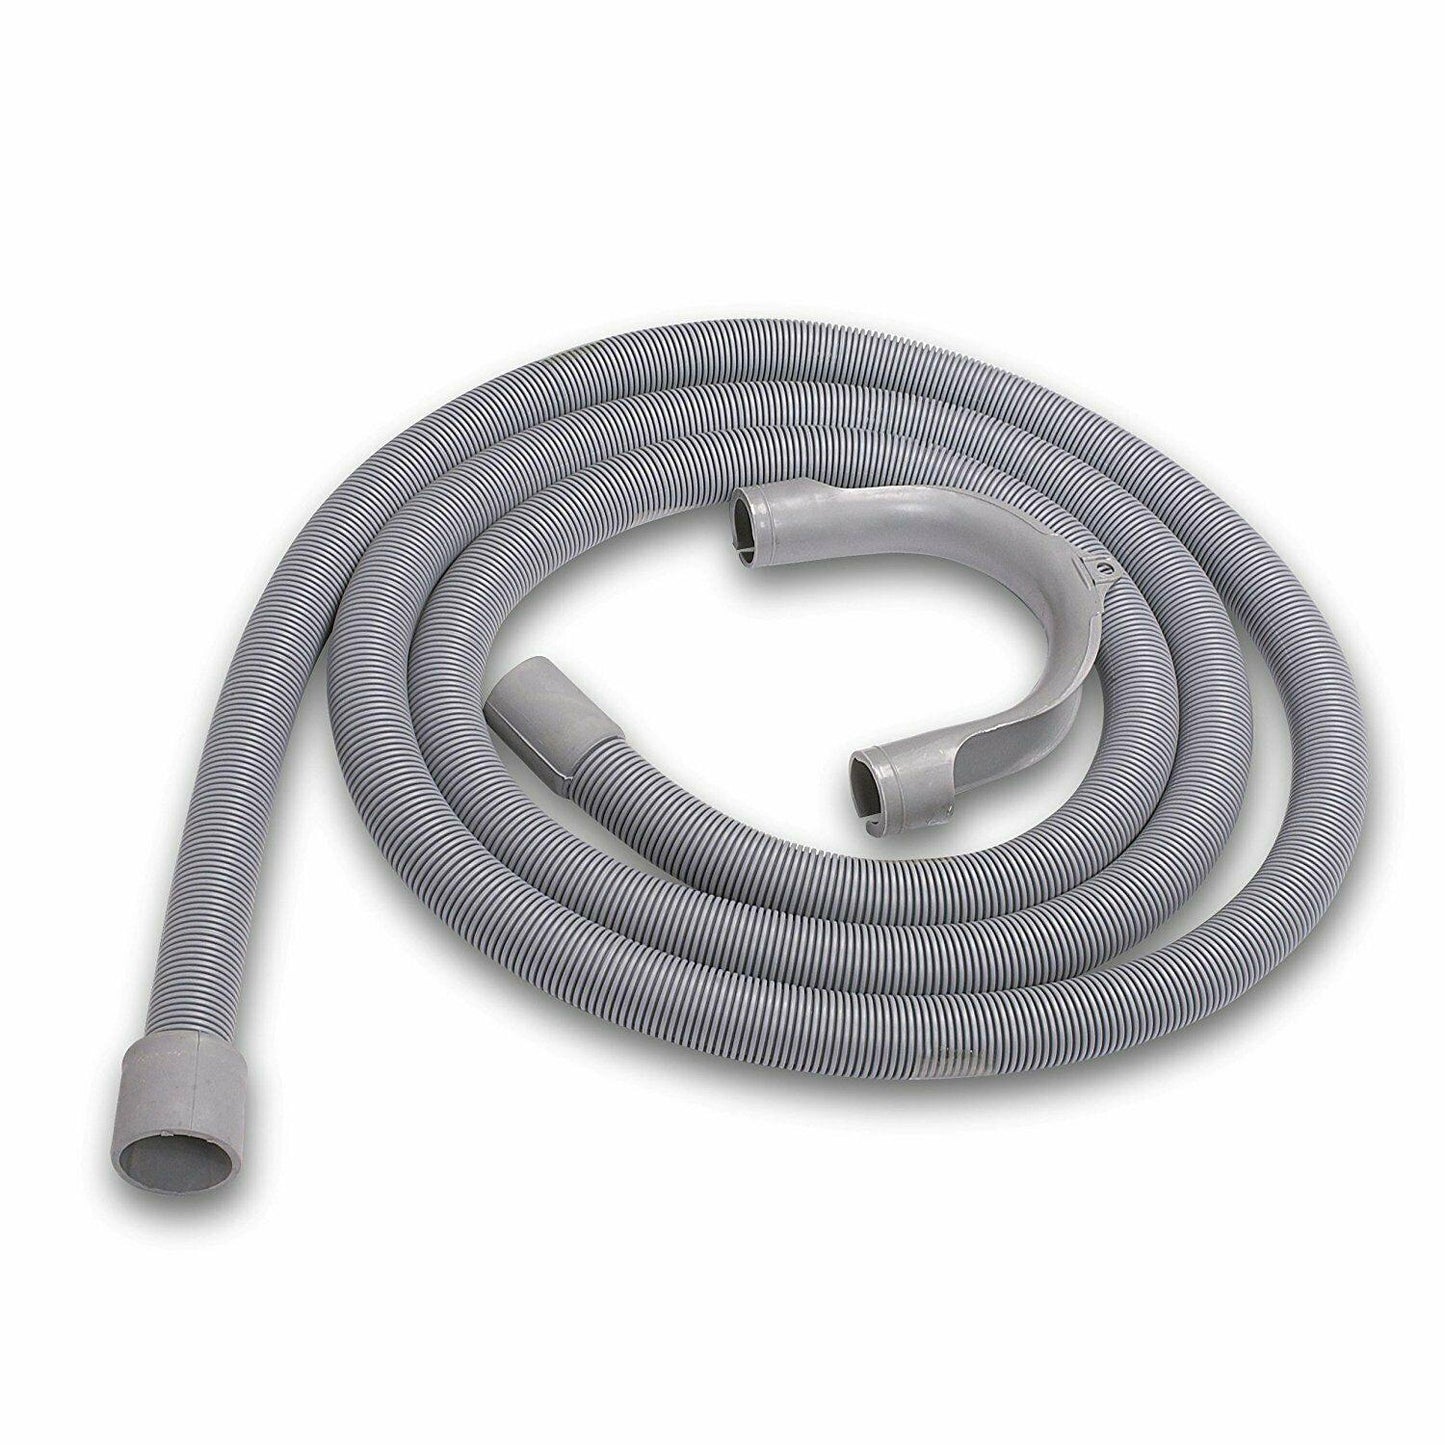 Washing Machine Drain Hose Outlet For Simpson 22S806K*01 22S807K*01 22S950L*00 Sparesbarn